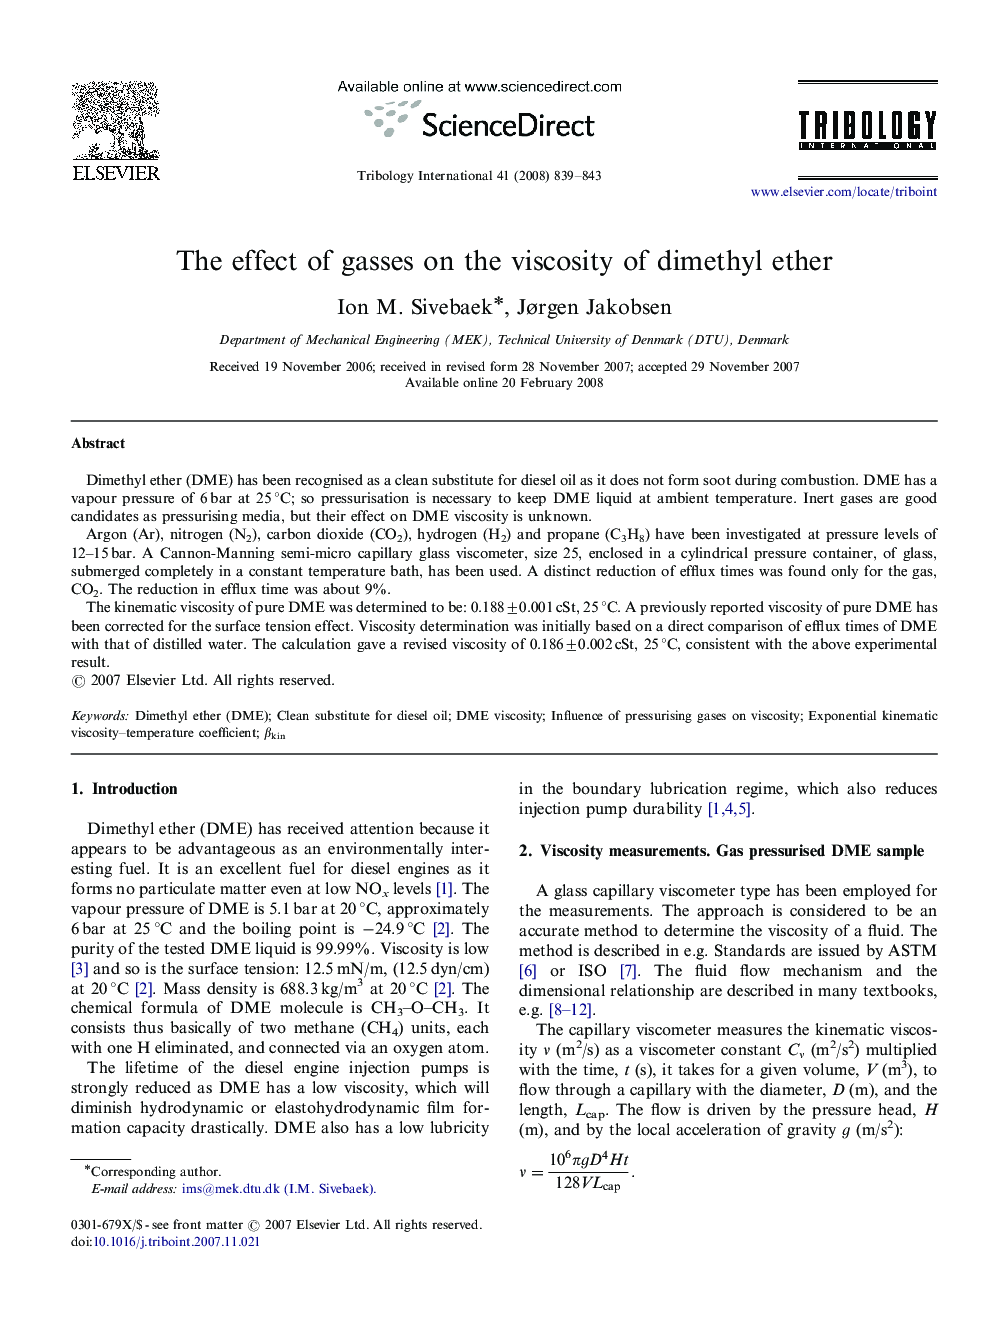 The effect of gasses on the viscosity of dimethyl ether